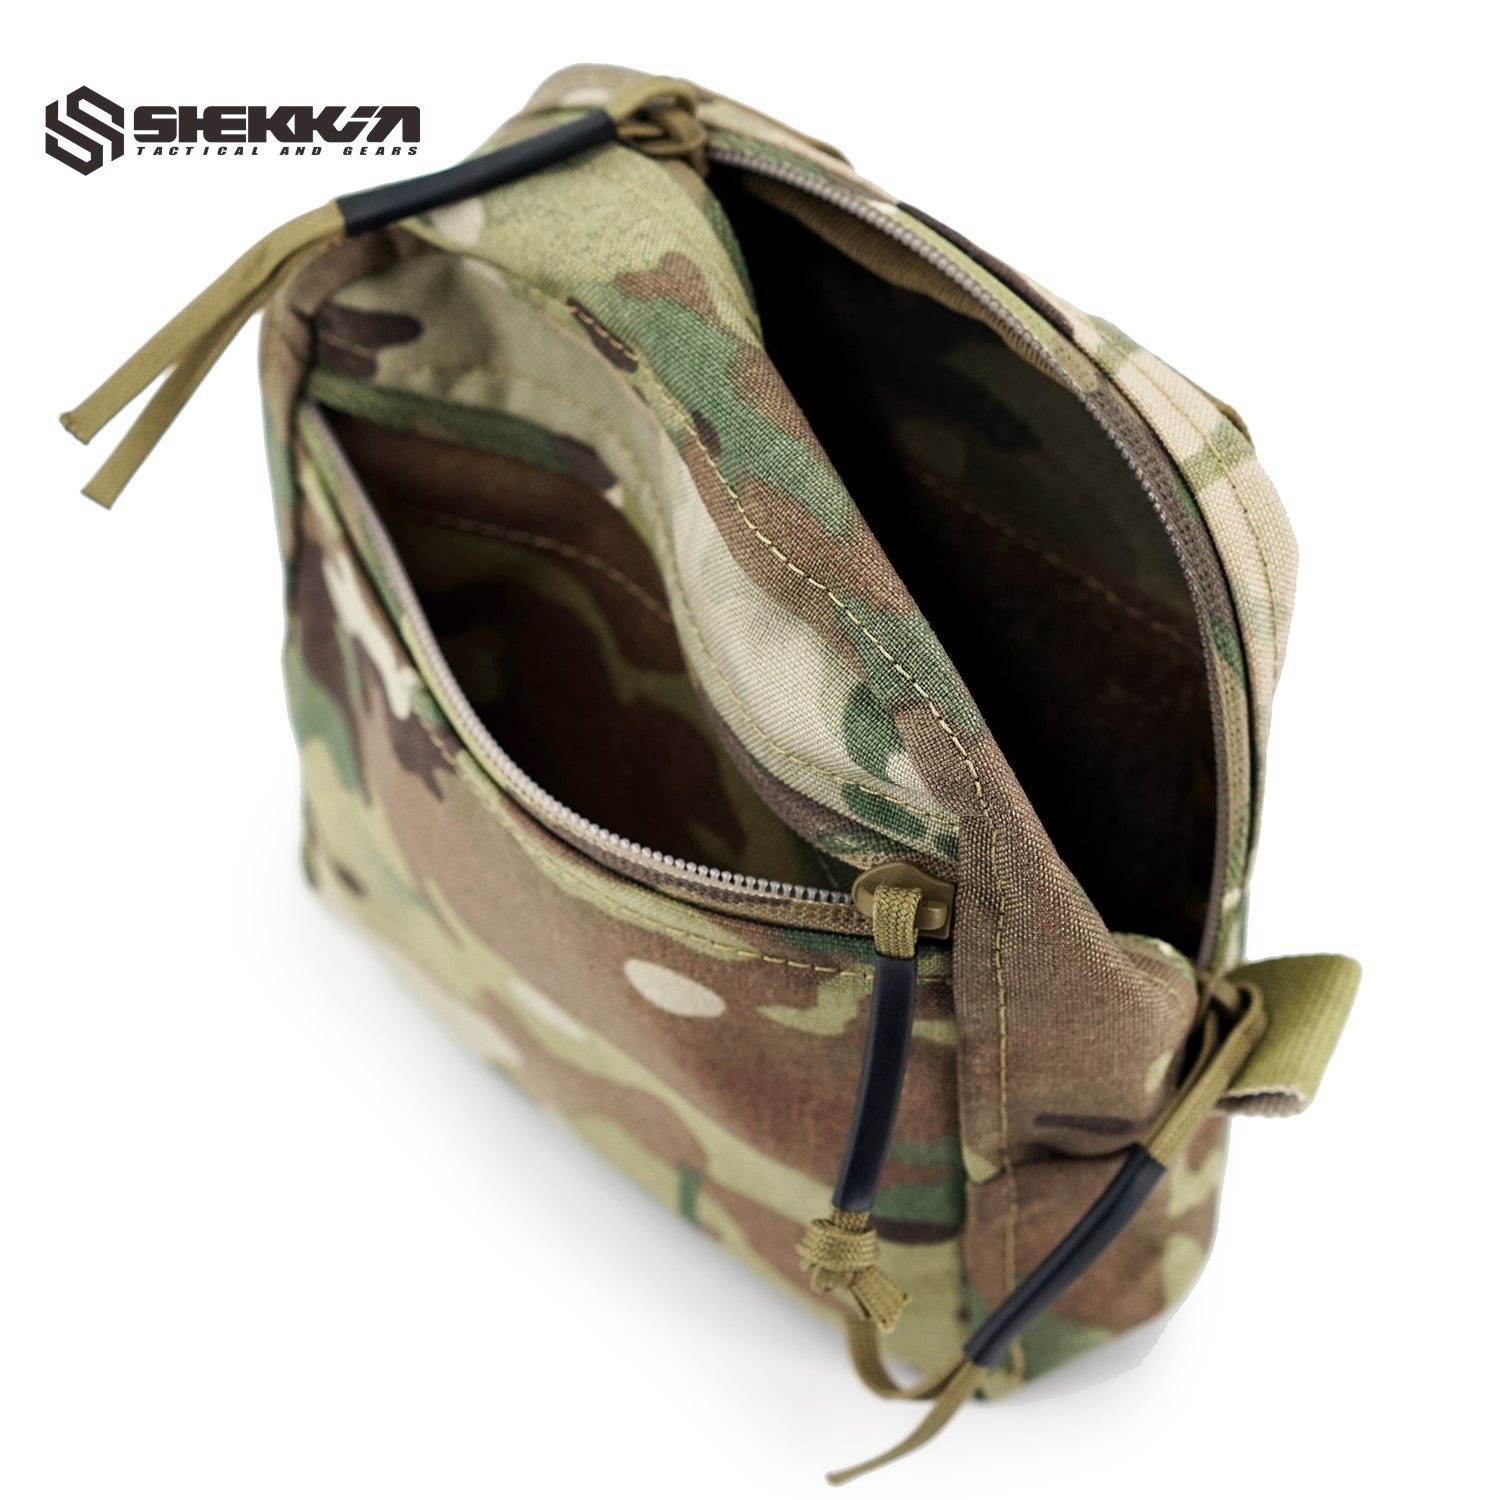 Delta Force General Purpose Utility Pouch